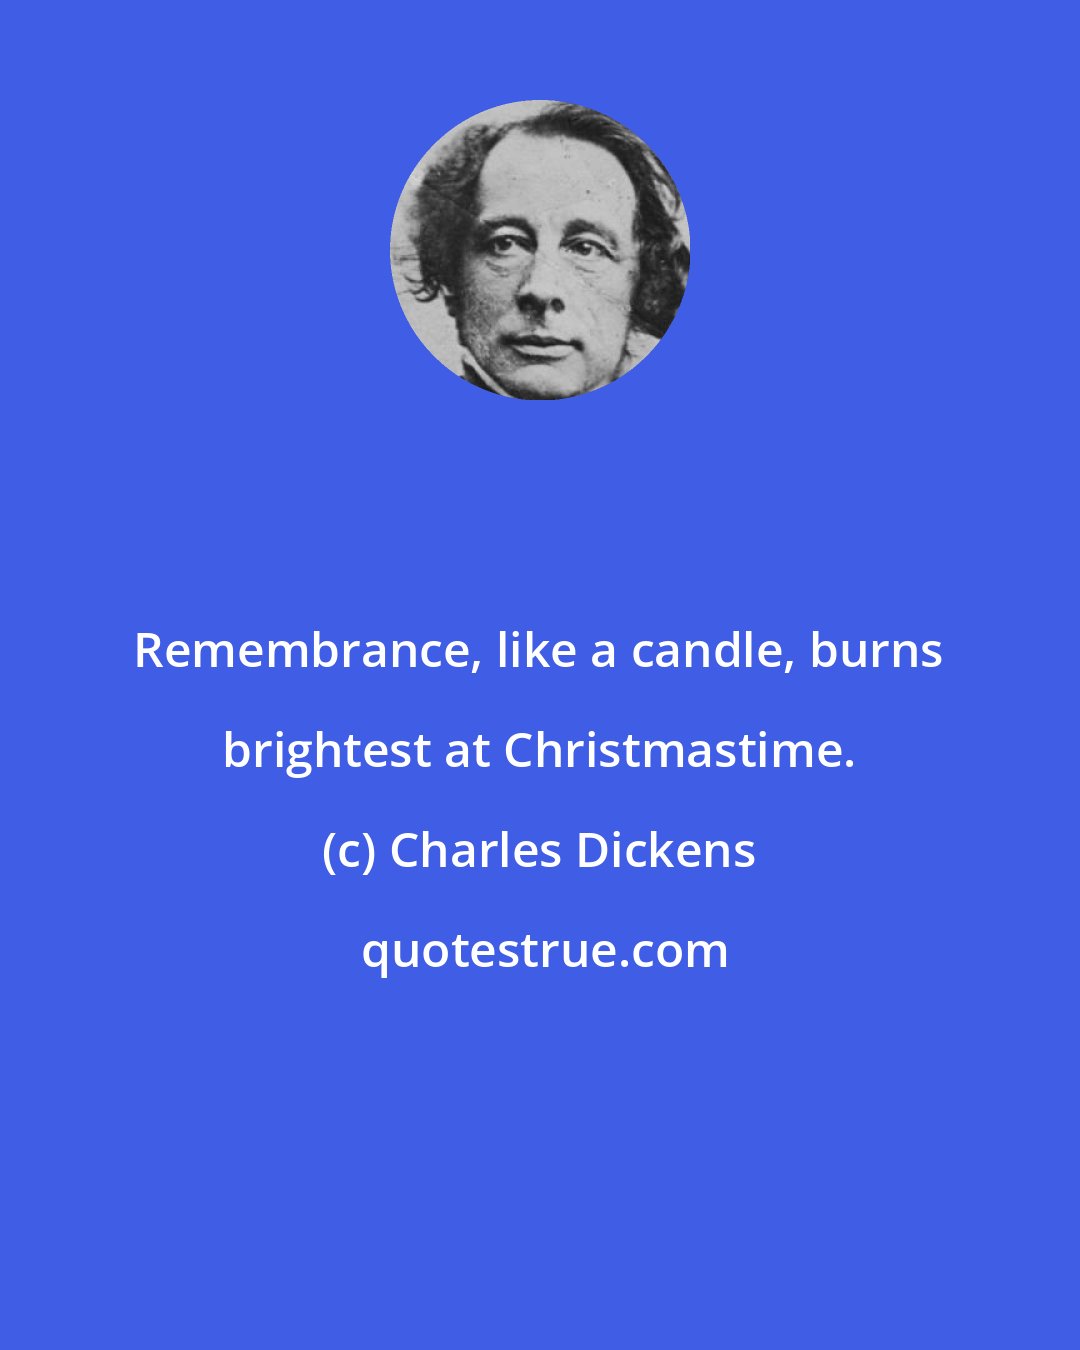 Charles Dickens: Remembrance, like a candle, burns brightest at Christmastime.